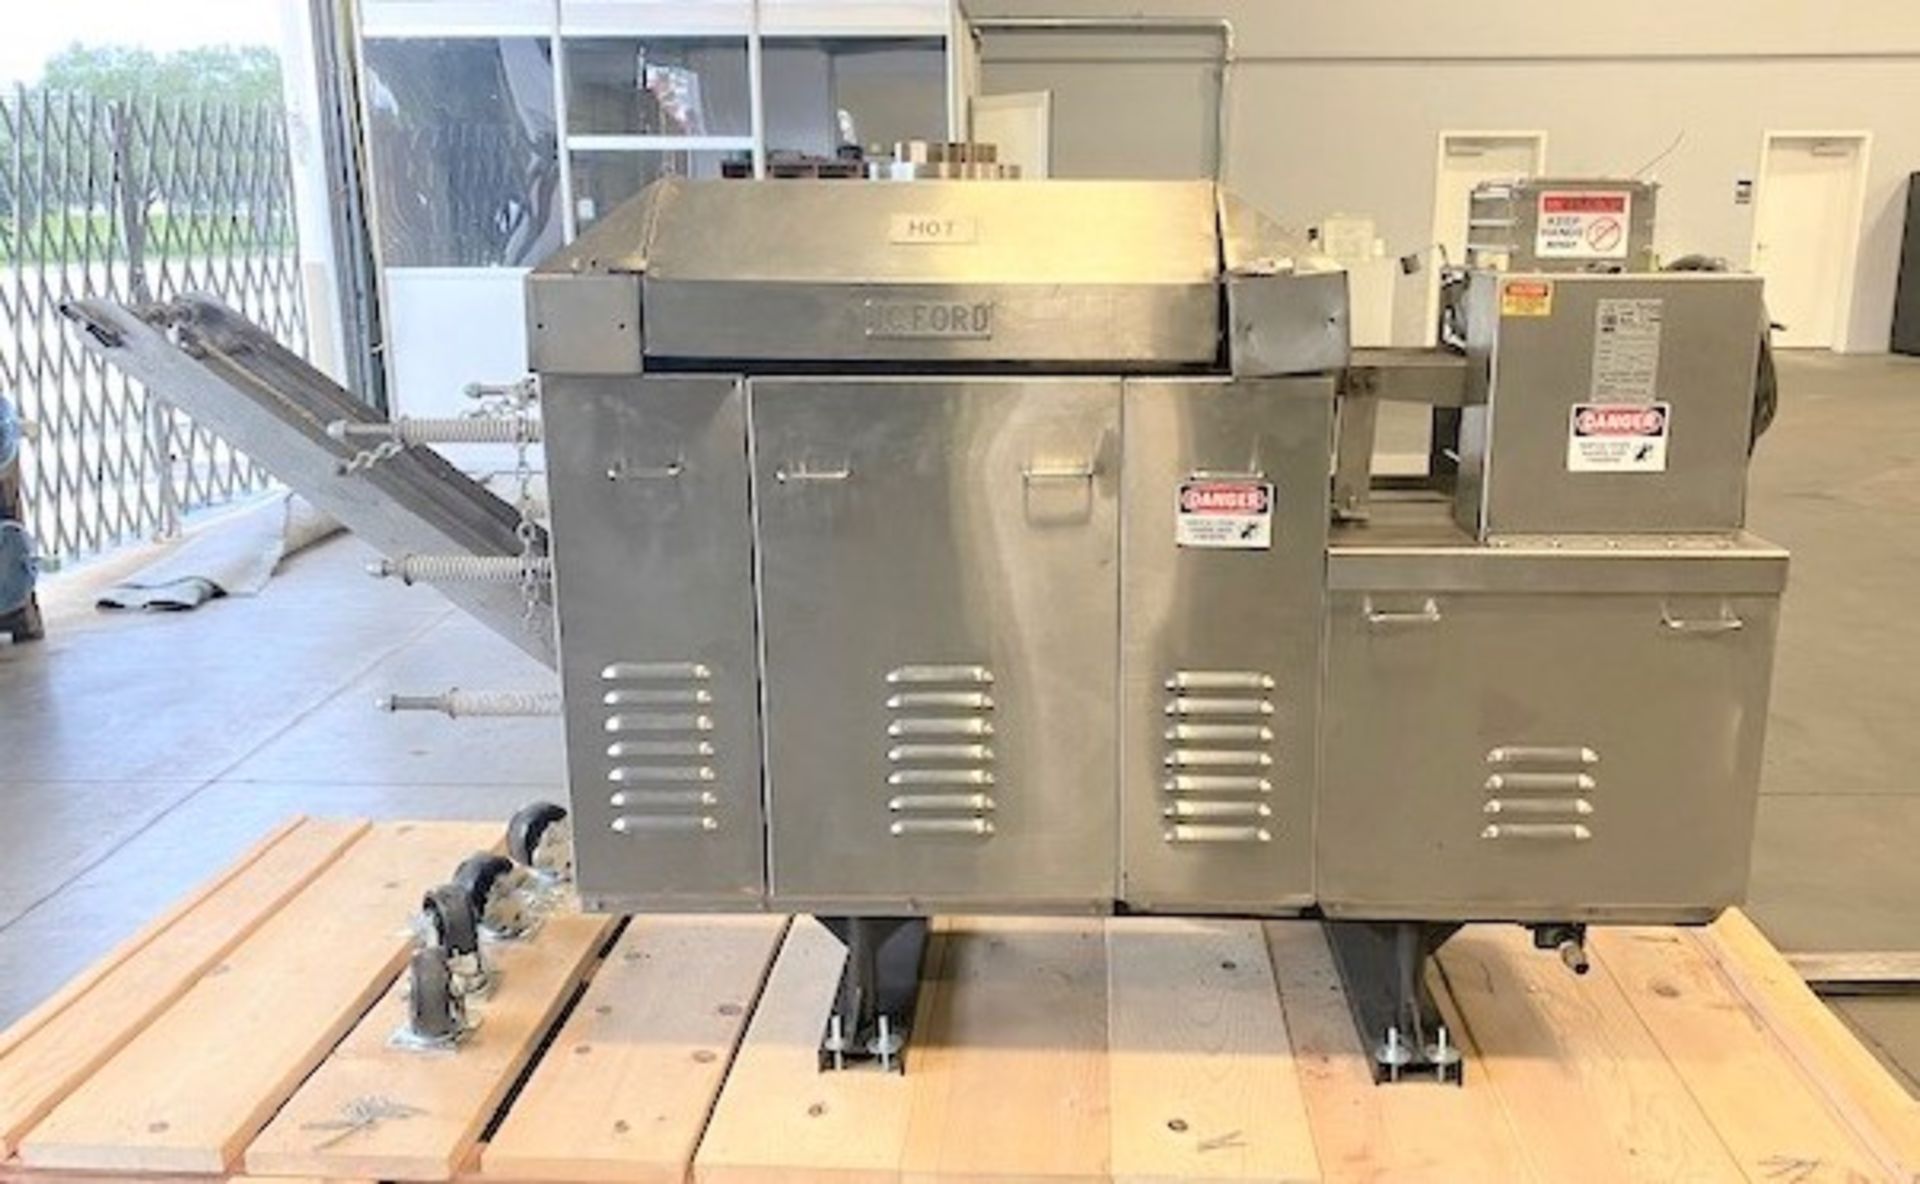 JC Ford Corn Tortilla Oven, Model T0 1100, S/N T0960103, Electric 230 V, 3 Amps, Dimensions 106" x - Image 2 of 22